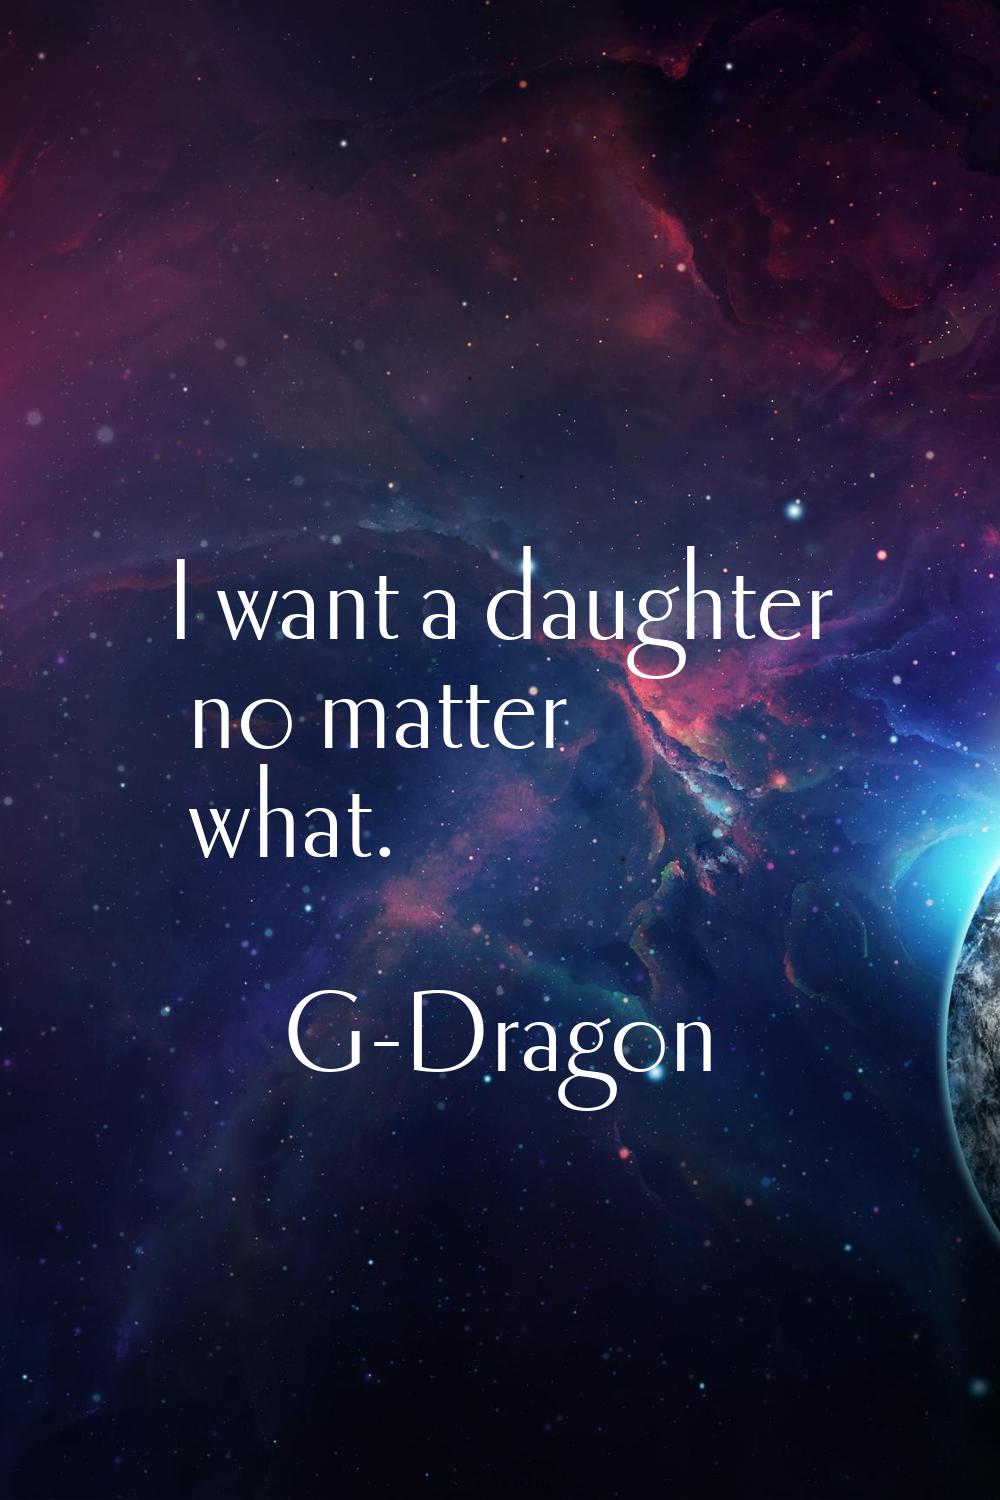 I want a daughter no matter what.